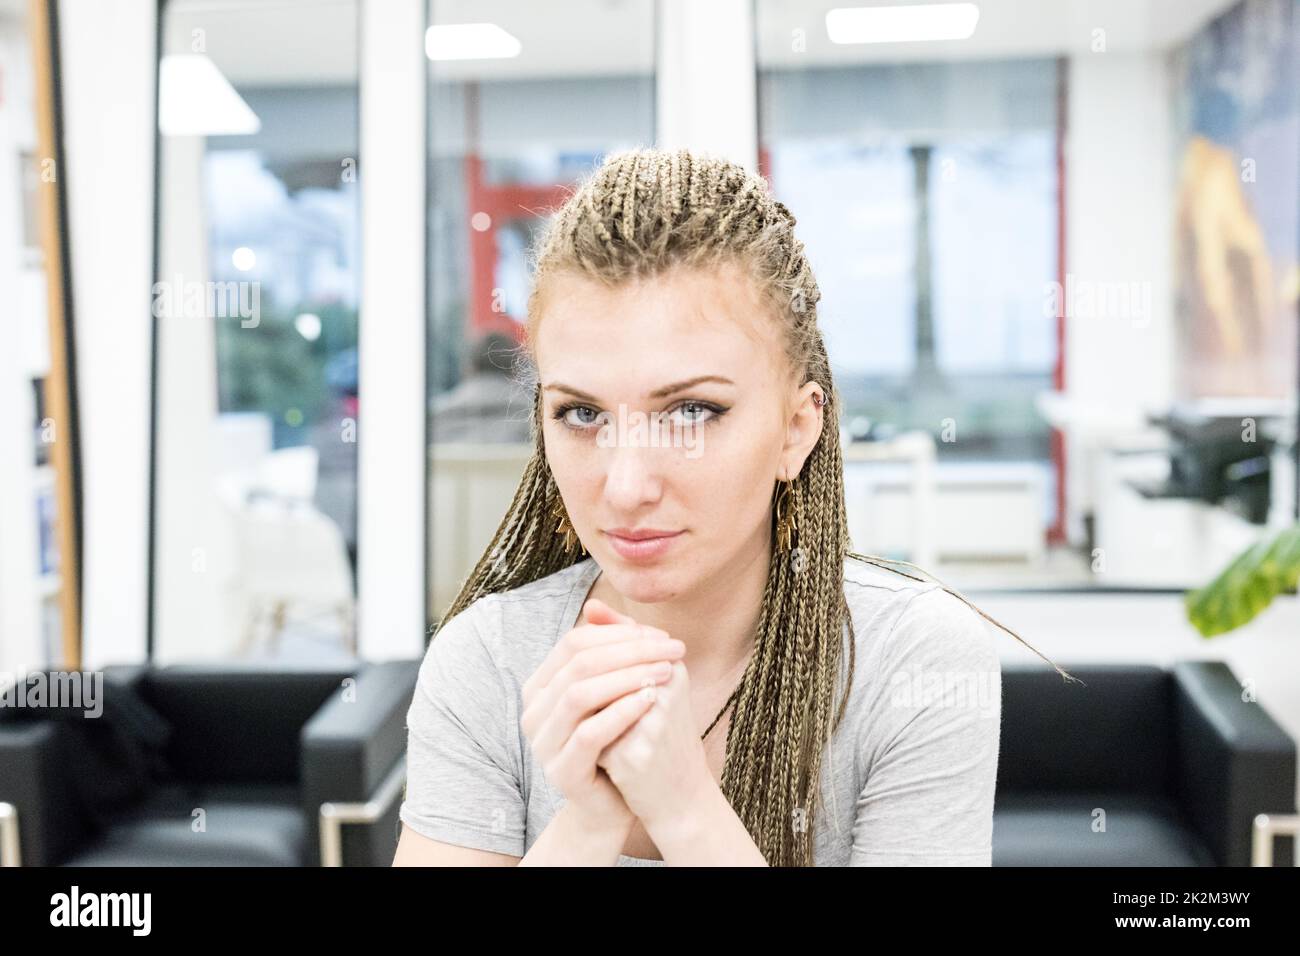 candid portrait of woman at work Stock Photo